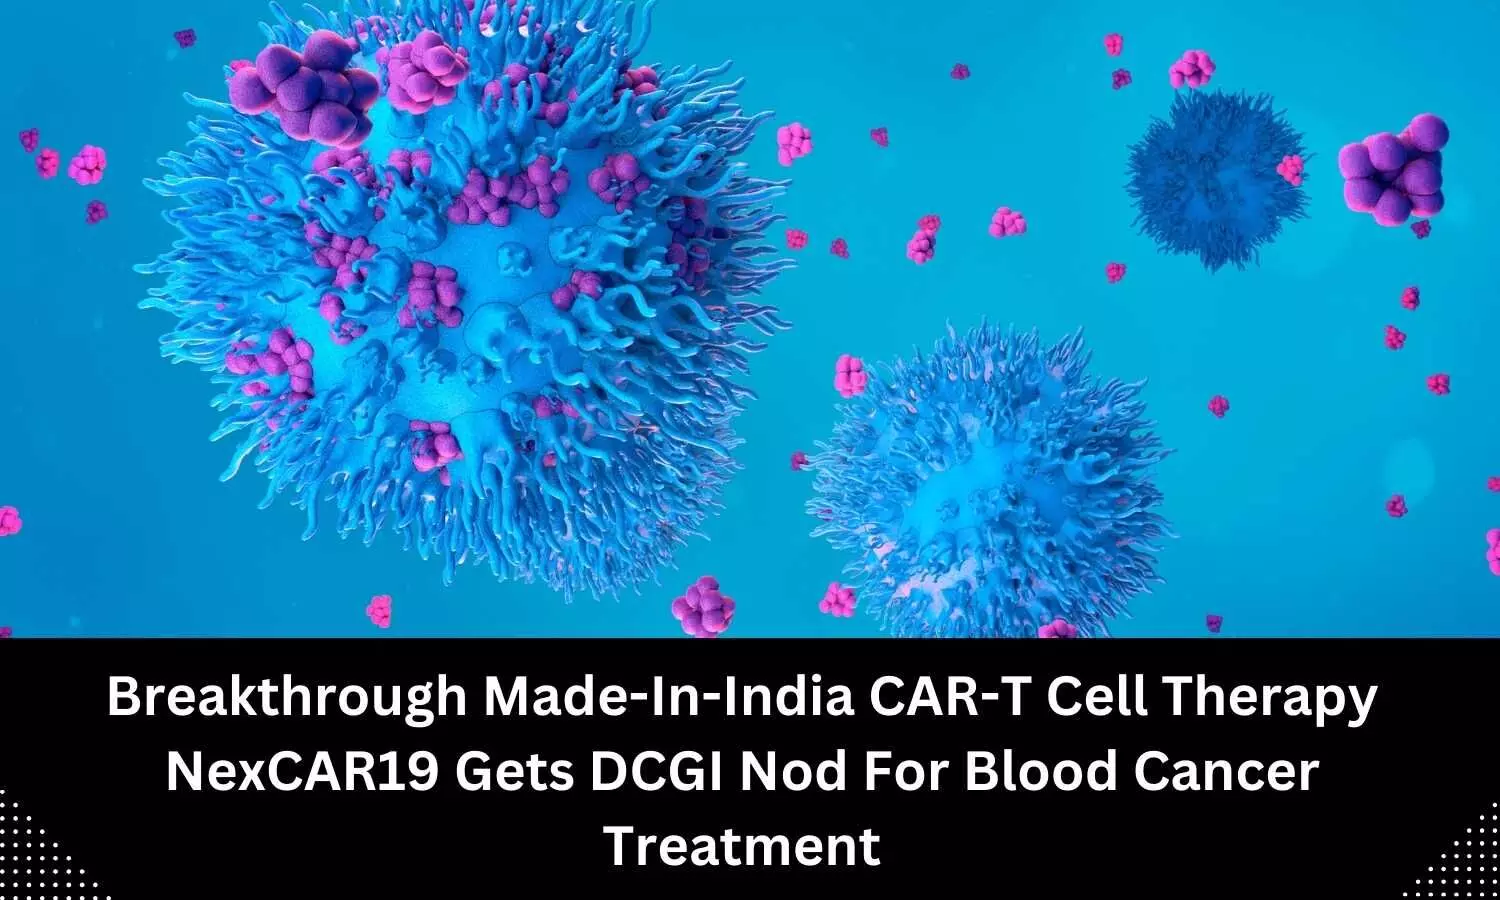 CAR-T cell therapy: DCGI approves NexCAR19 for blood cancer treatment